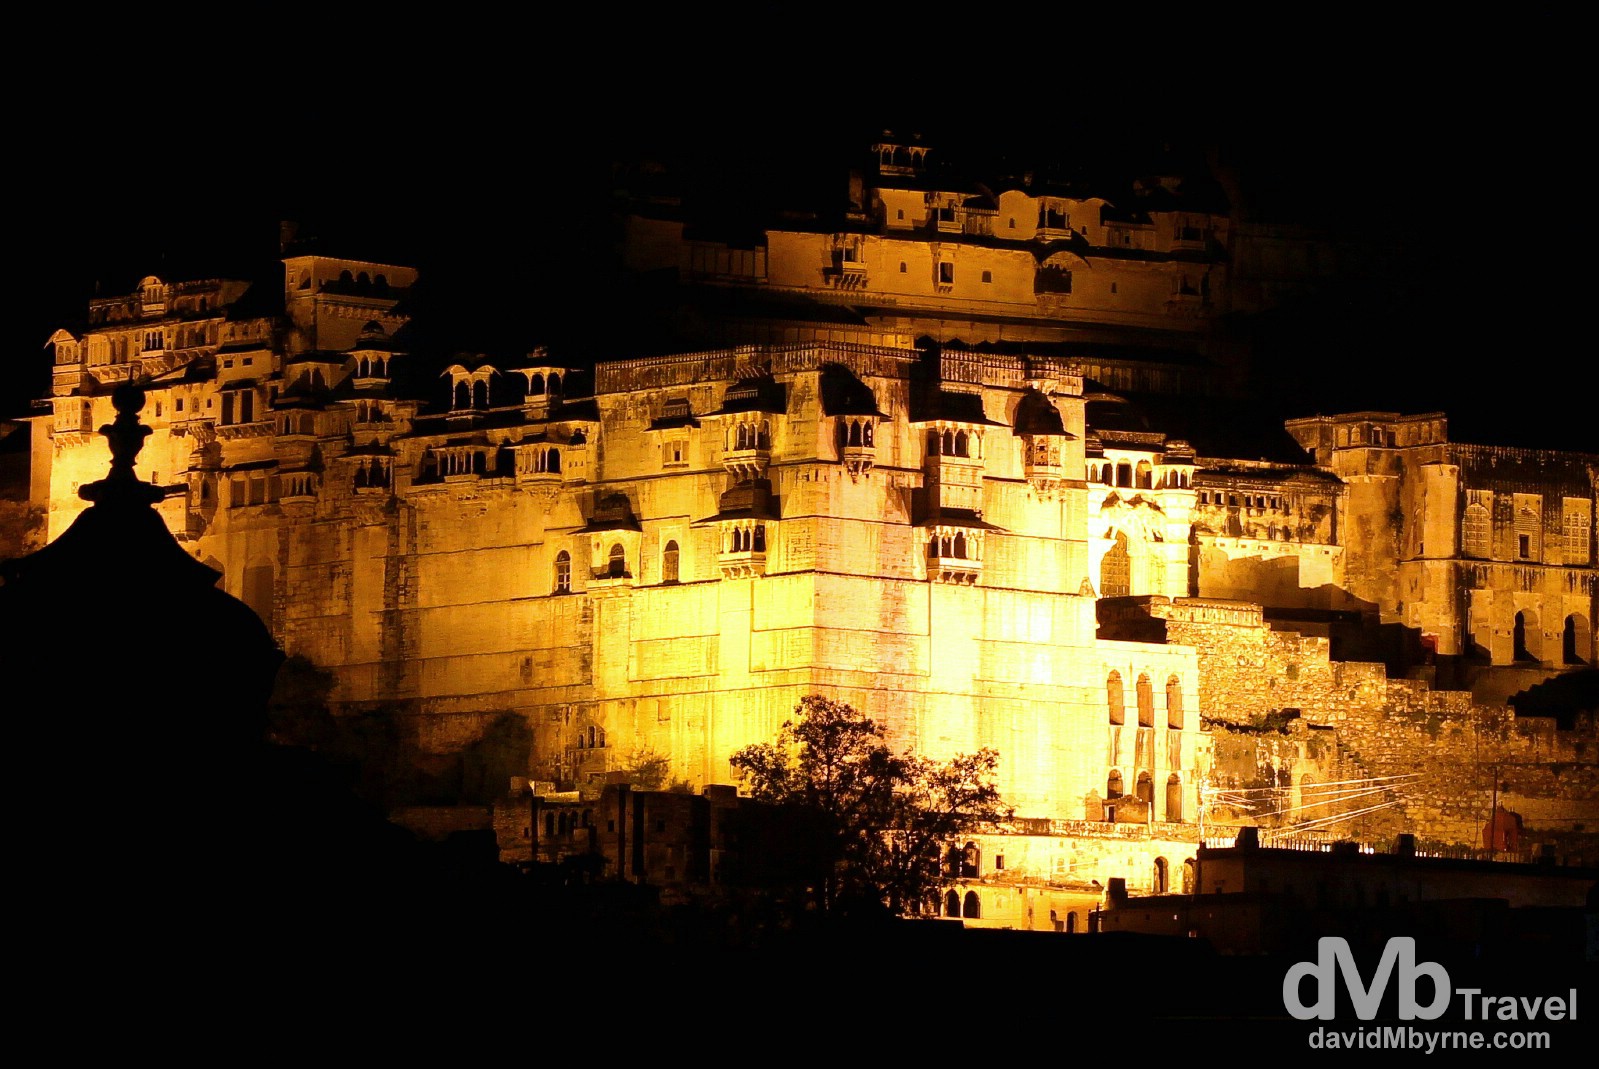 The imposing façade of Bundi Palace at night as seen from the rooftops of Old Town Bundi, Rajasthan, India. October 1st 2012.